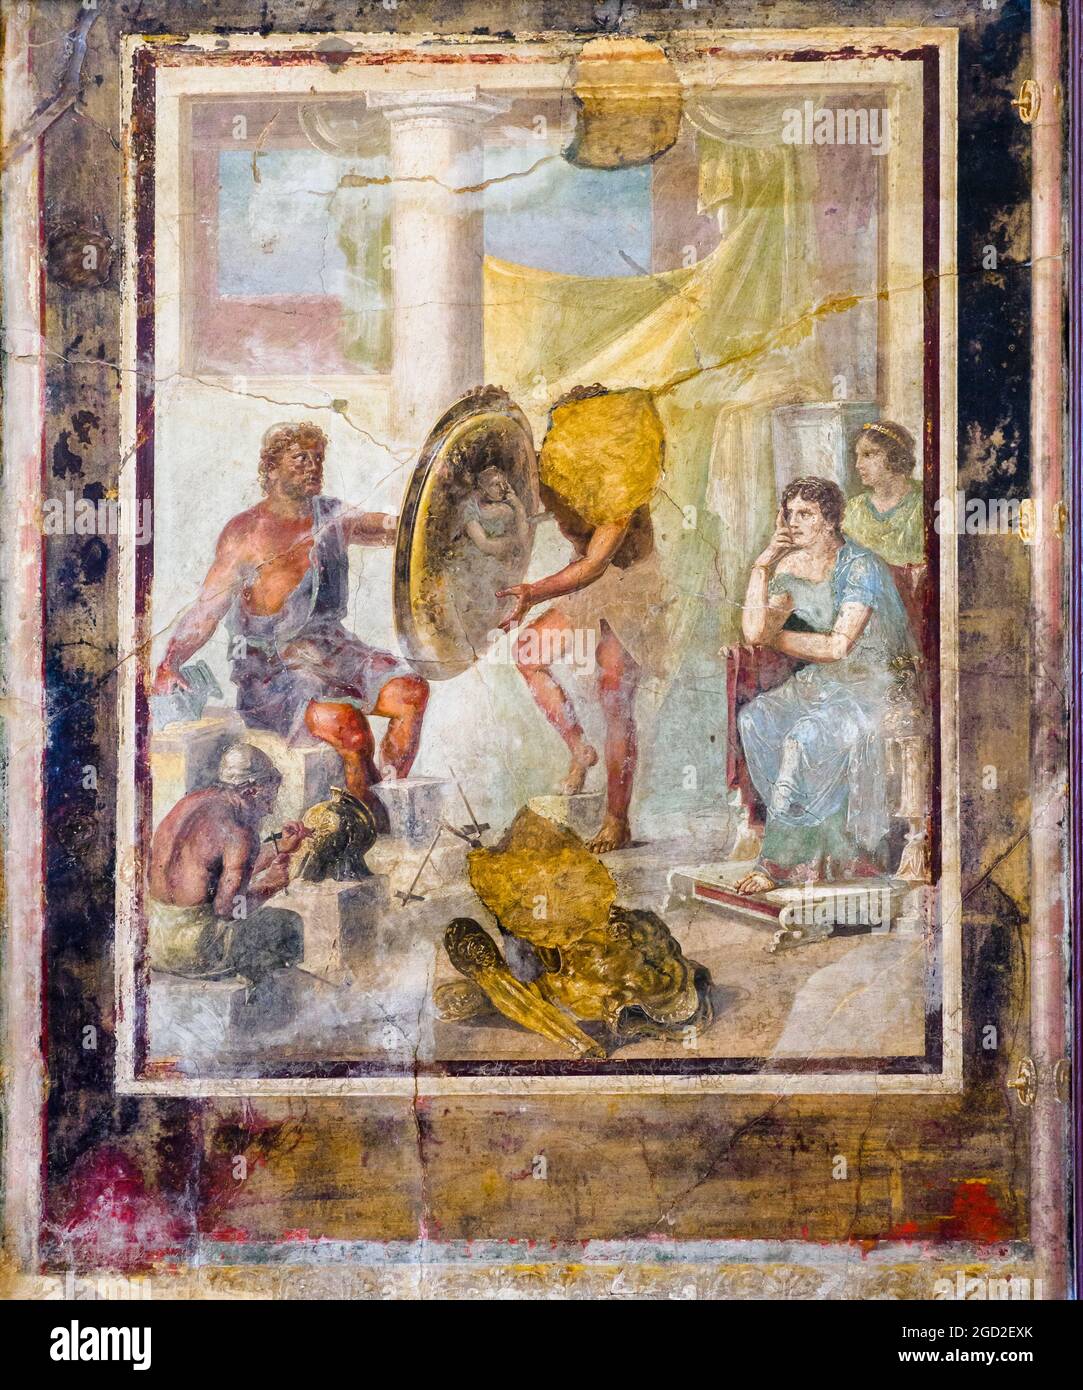 Aeneas, wounded, is treated by the surgeon laspi, while Aphrodite rushes to assist her son who leans on young Ascanius fresco Pompeii, Casa si Sirico (House of Siricus) 45-79 AD Stock Photo